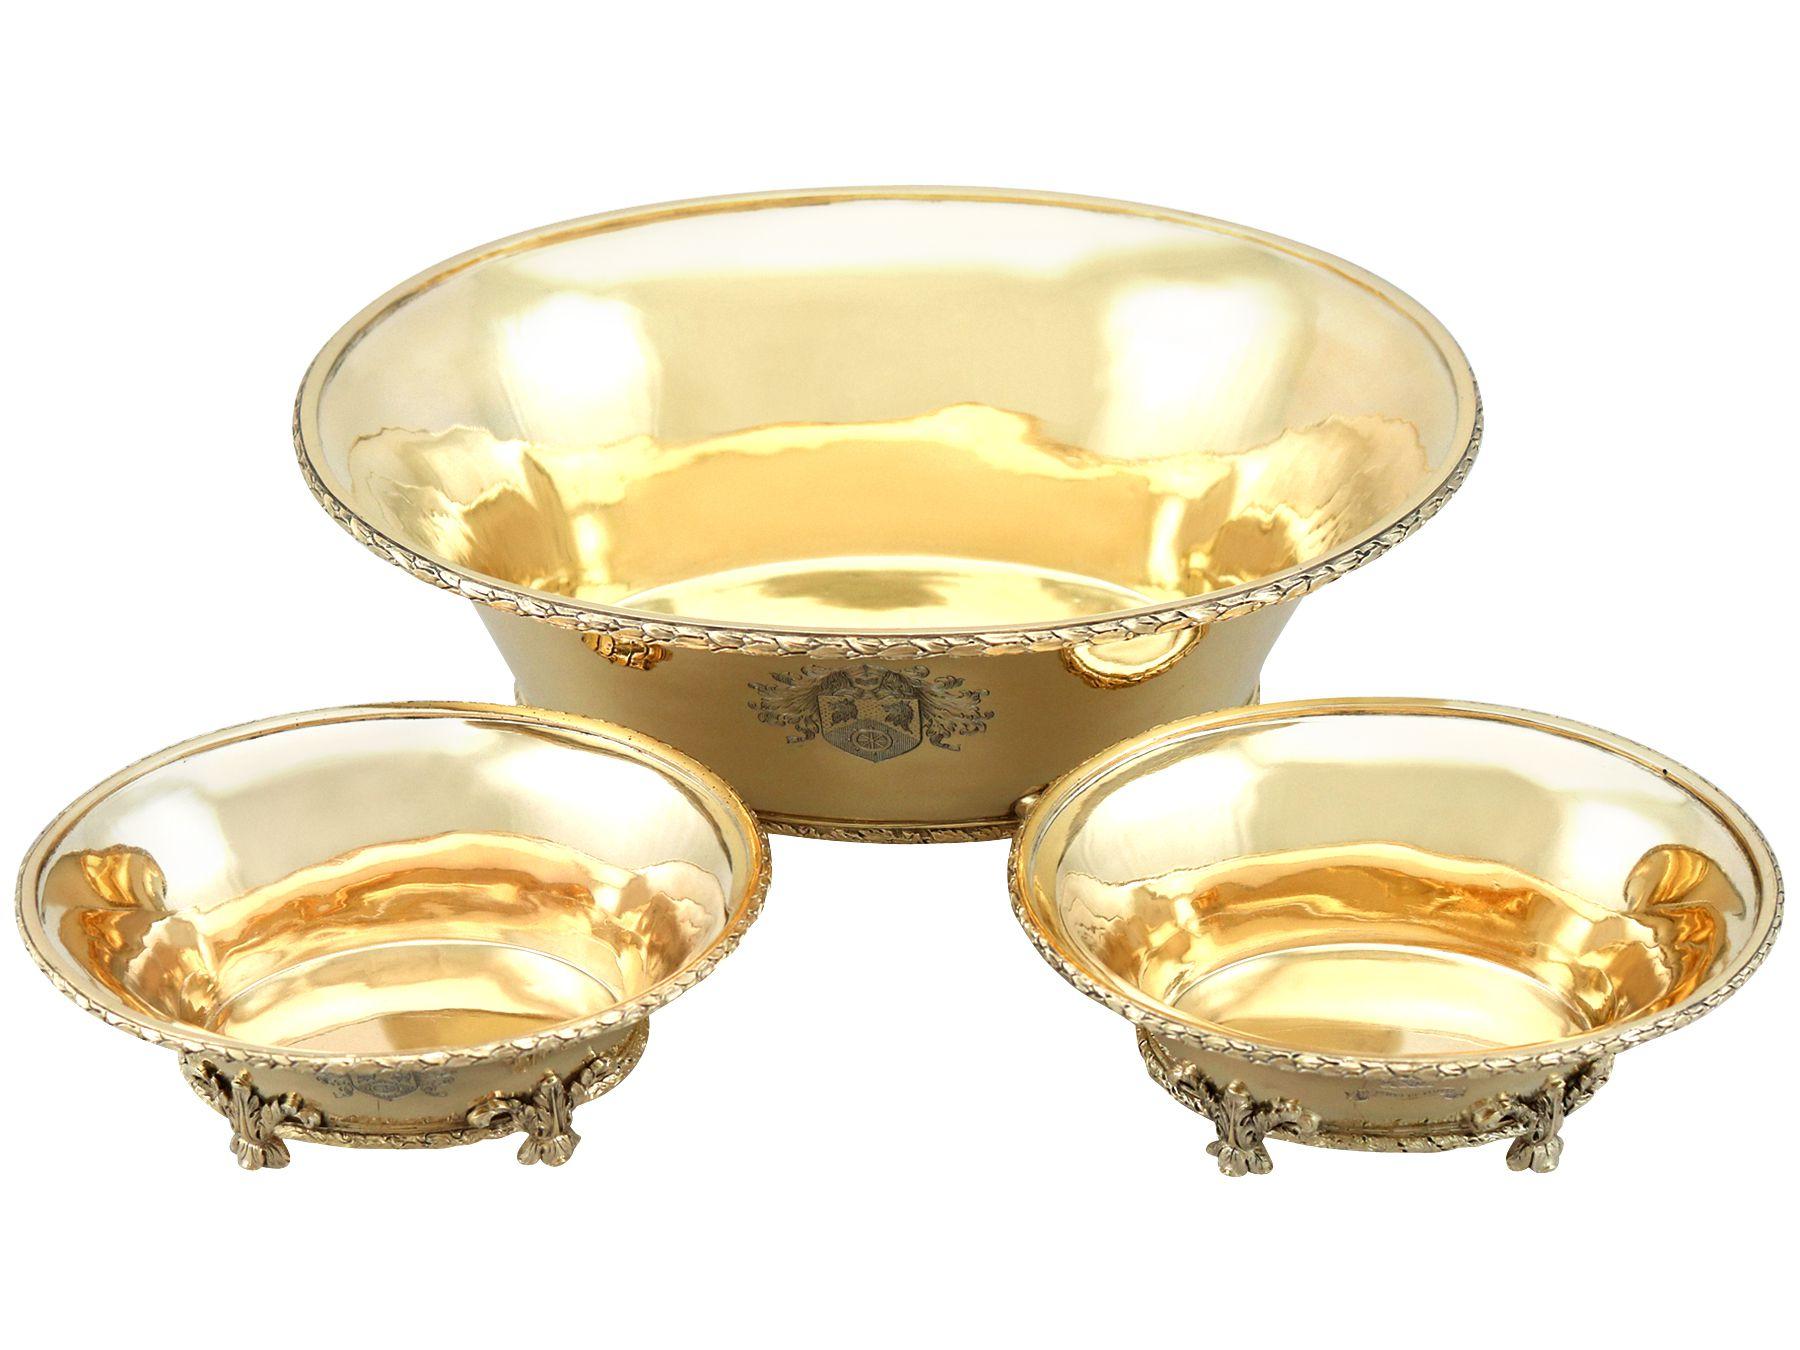 An exceptional, fine and impressive antique George V English sterling silver gilt suit of dishes made by William Comyns & Sons Ltd; an addition to our silverware collection

These exceptional antique Victorian sterling silver gilt dishes have an